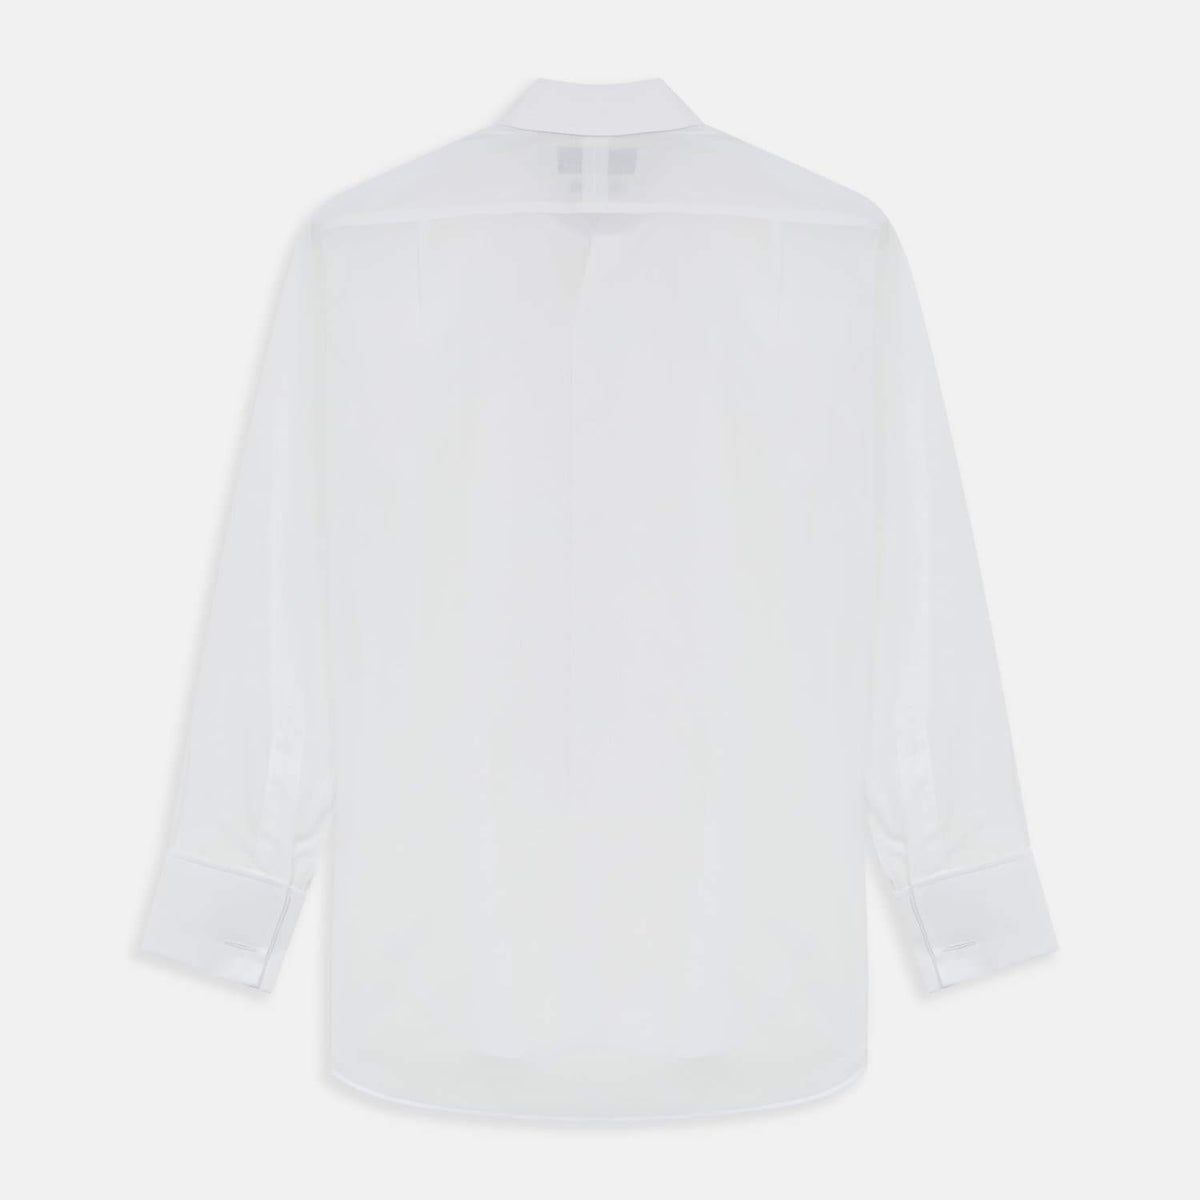 White Voile Dress Shirt - Die Another Day Edition - By Turnbull &amp; Asser CLOTHING Turnbull &amp; Asser 